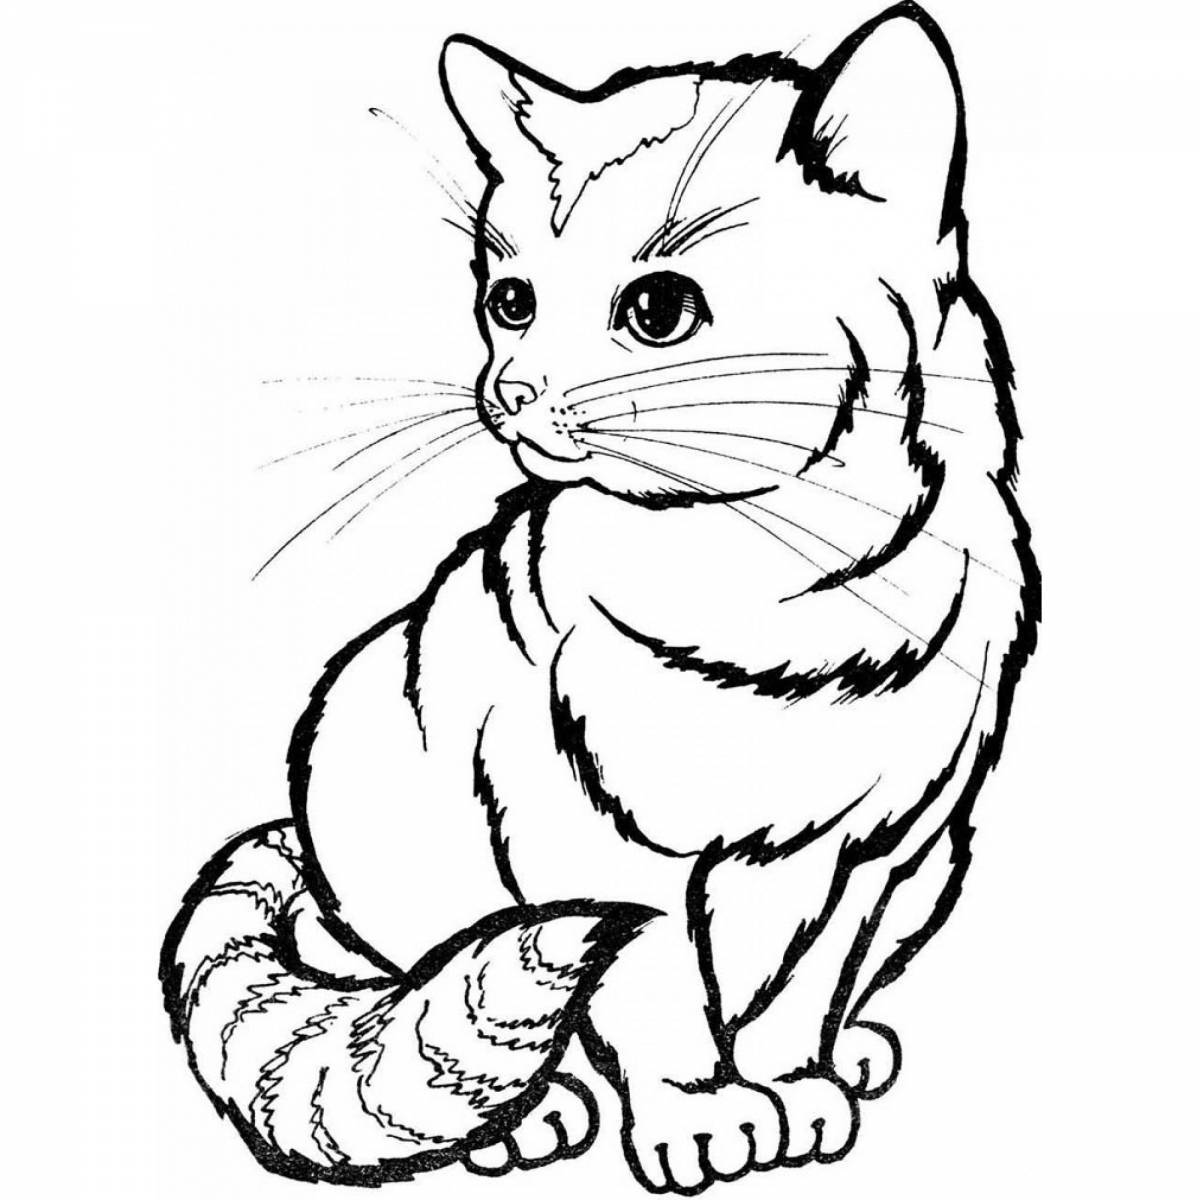 Naughty cat coloring book for kids